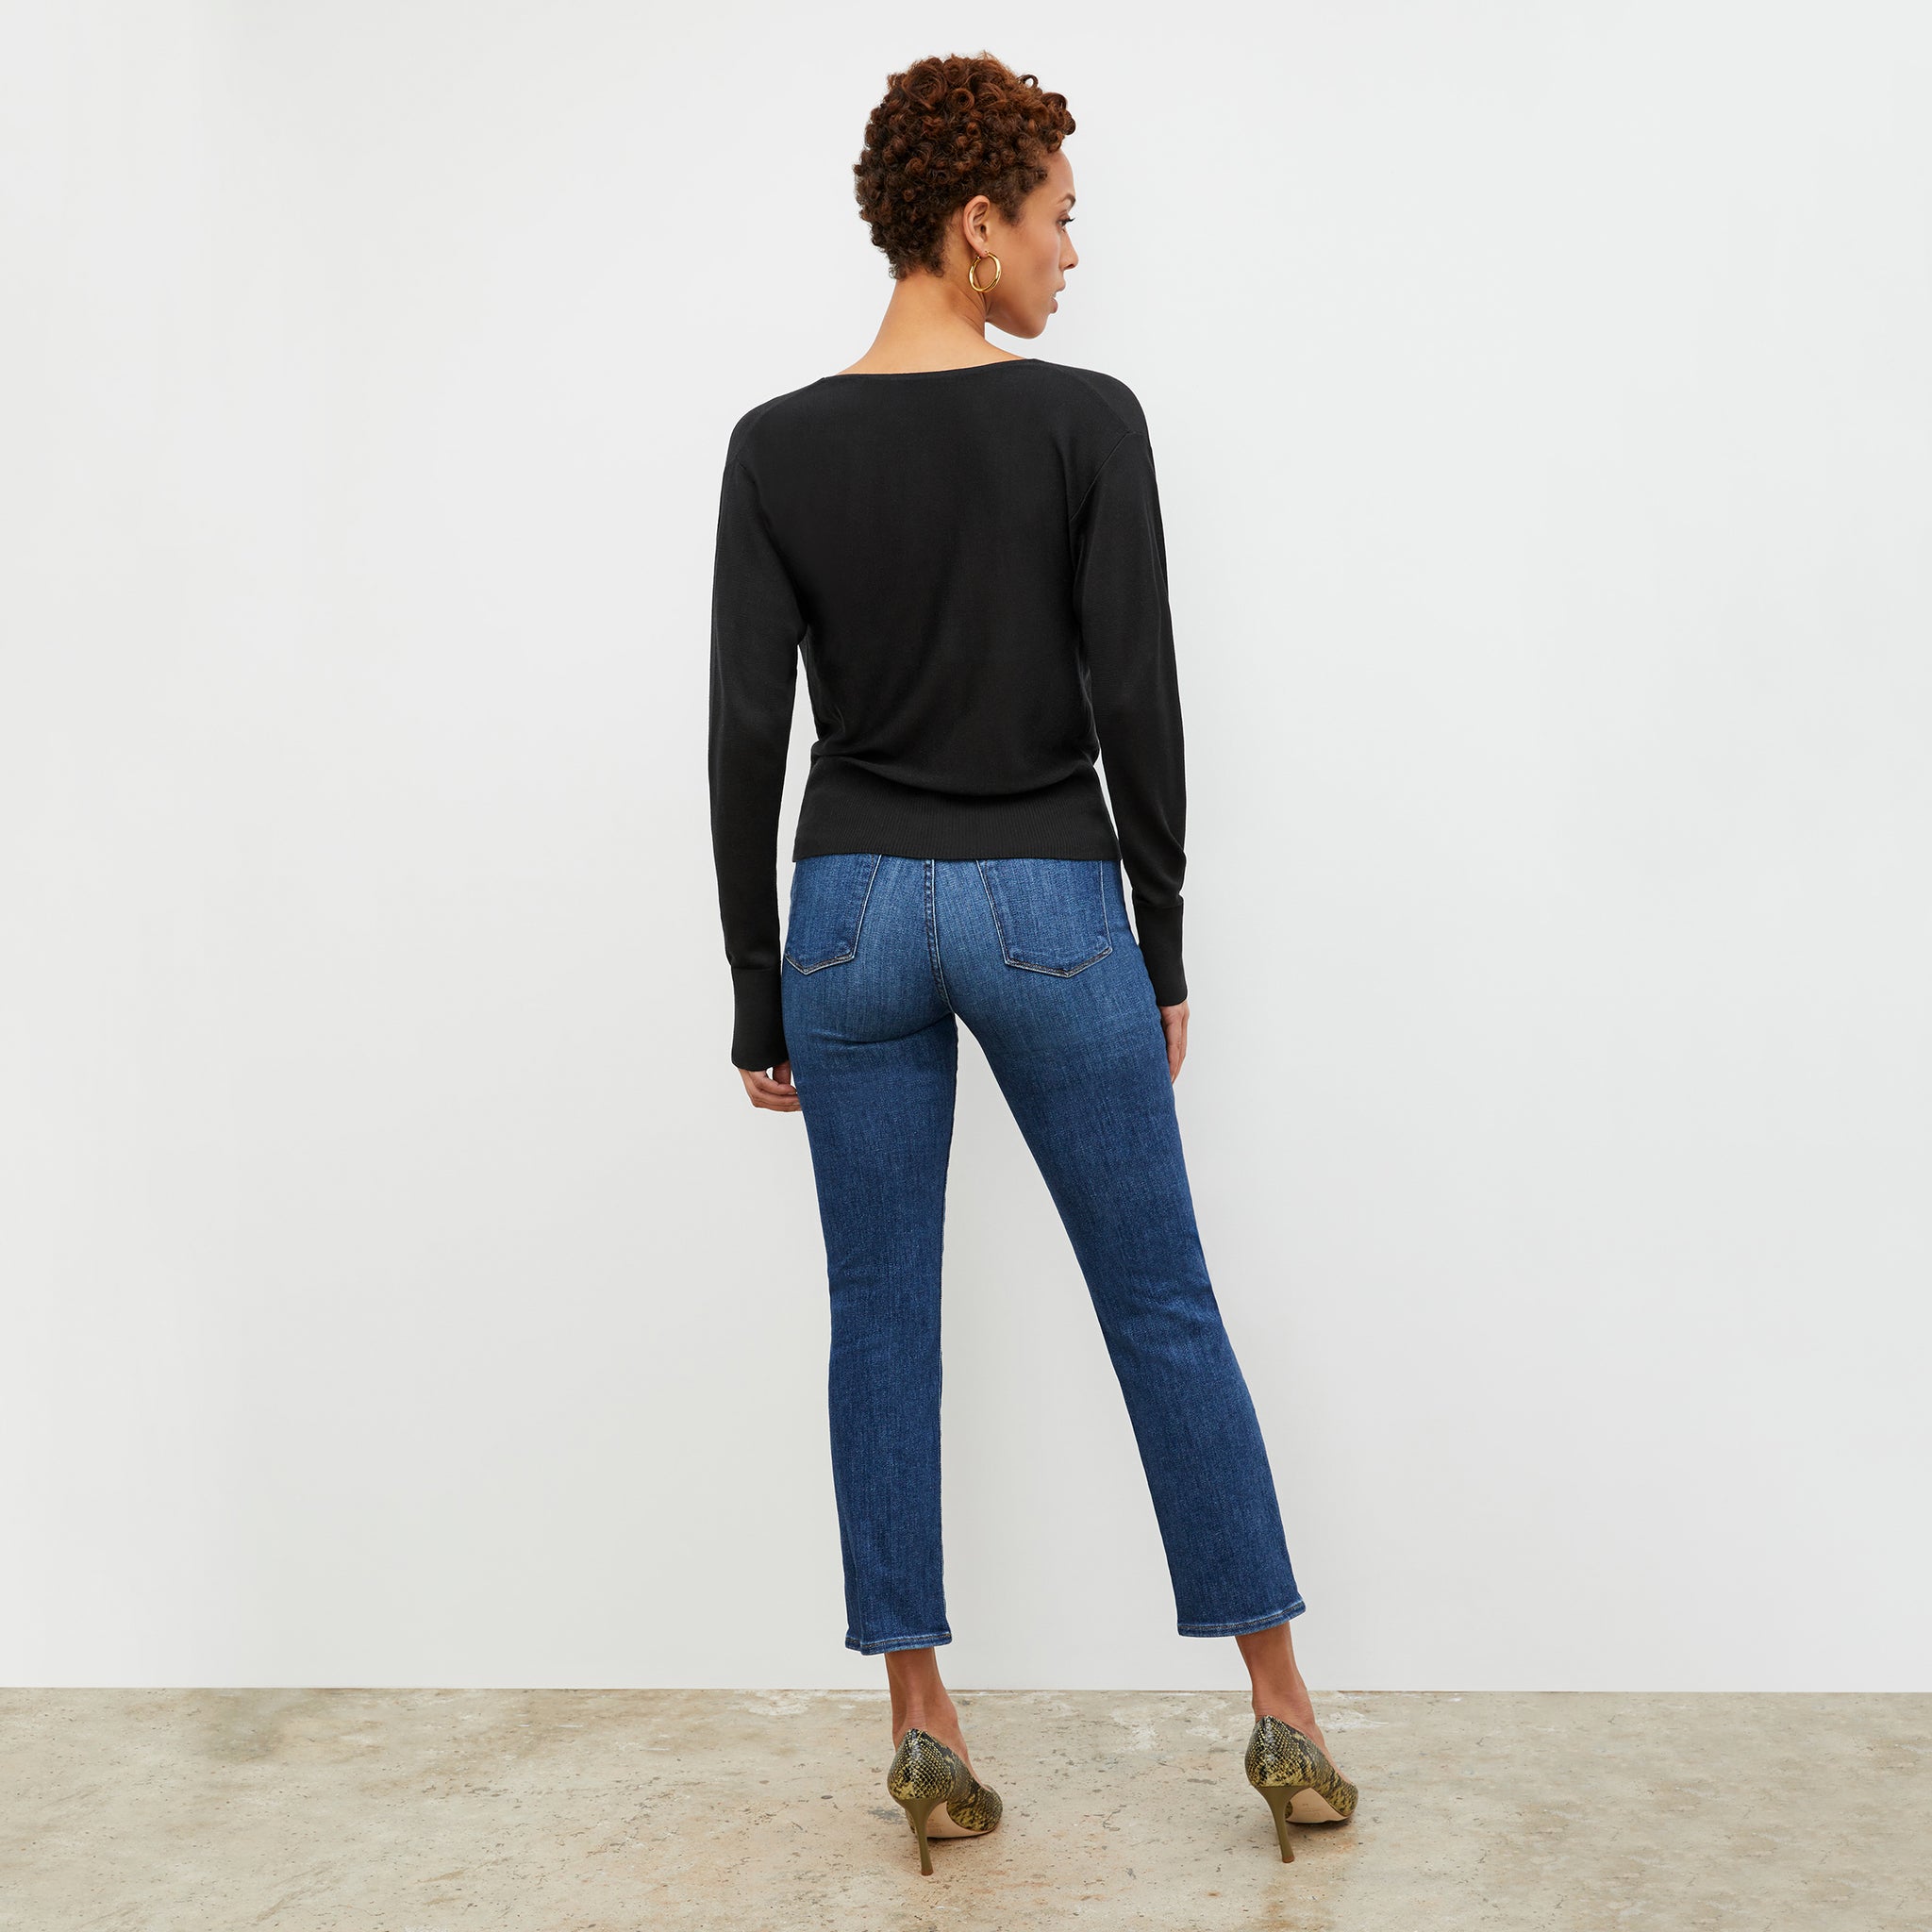 Back image of a woman wearing the Monica Top in Black